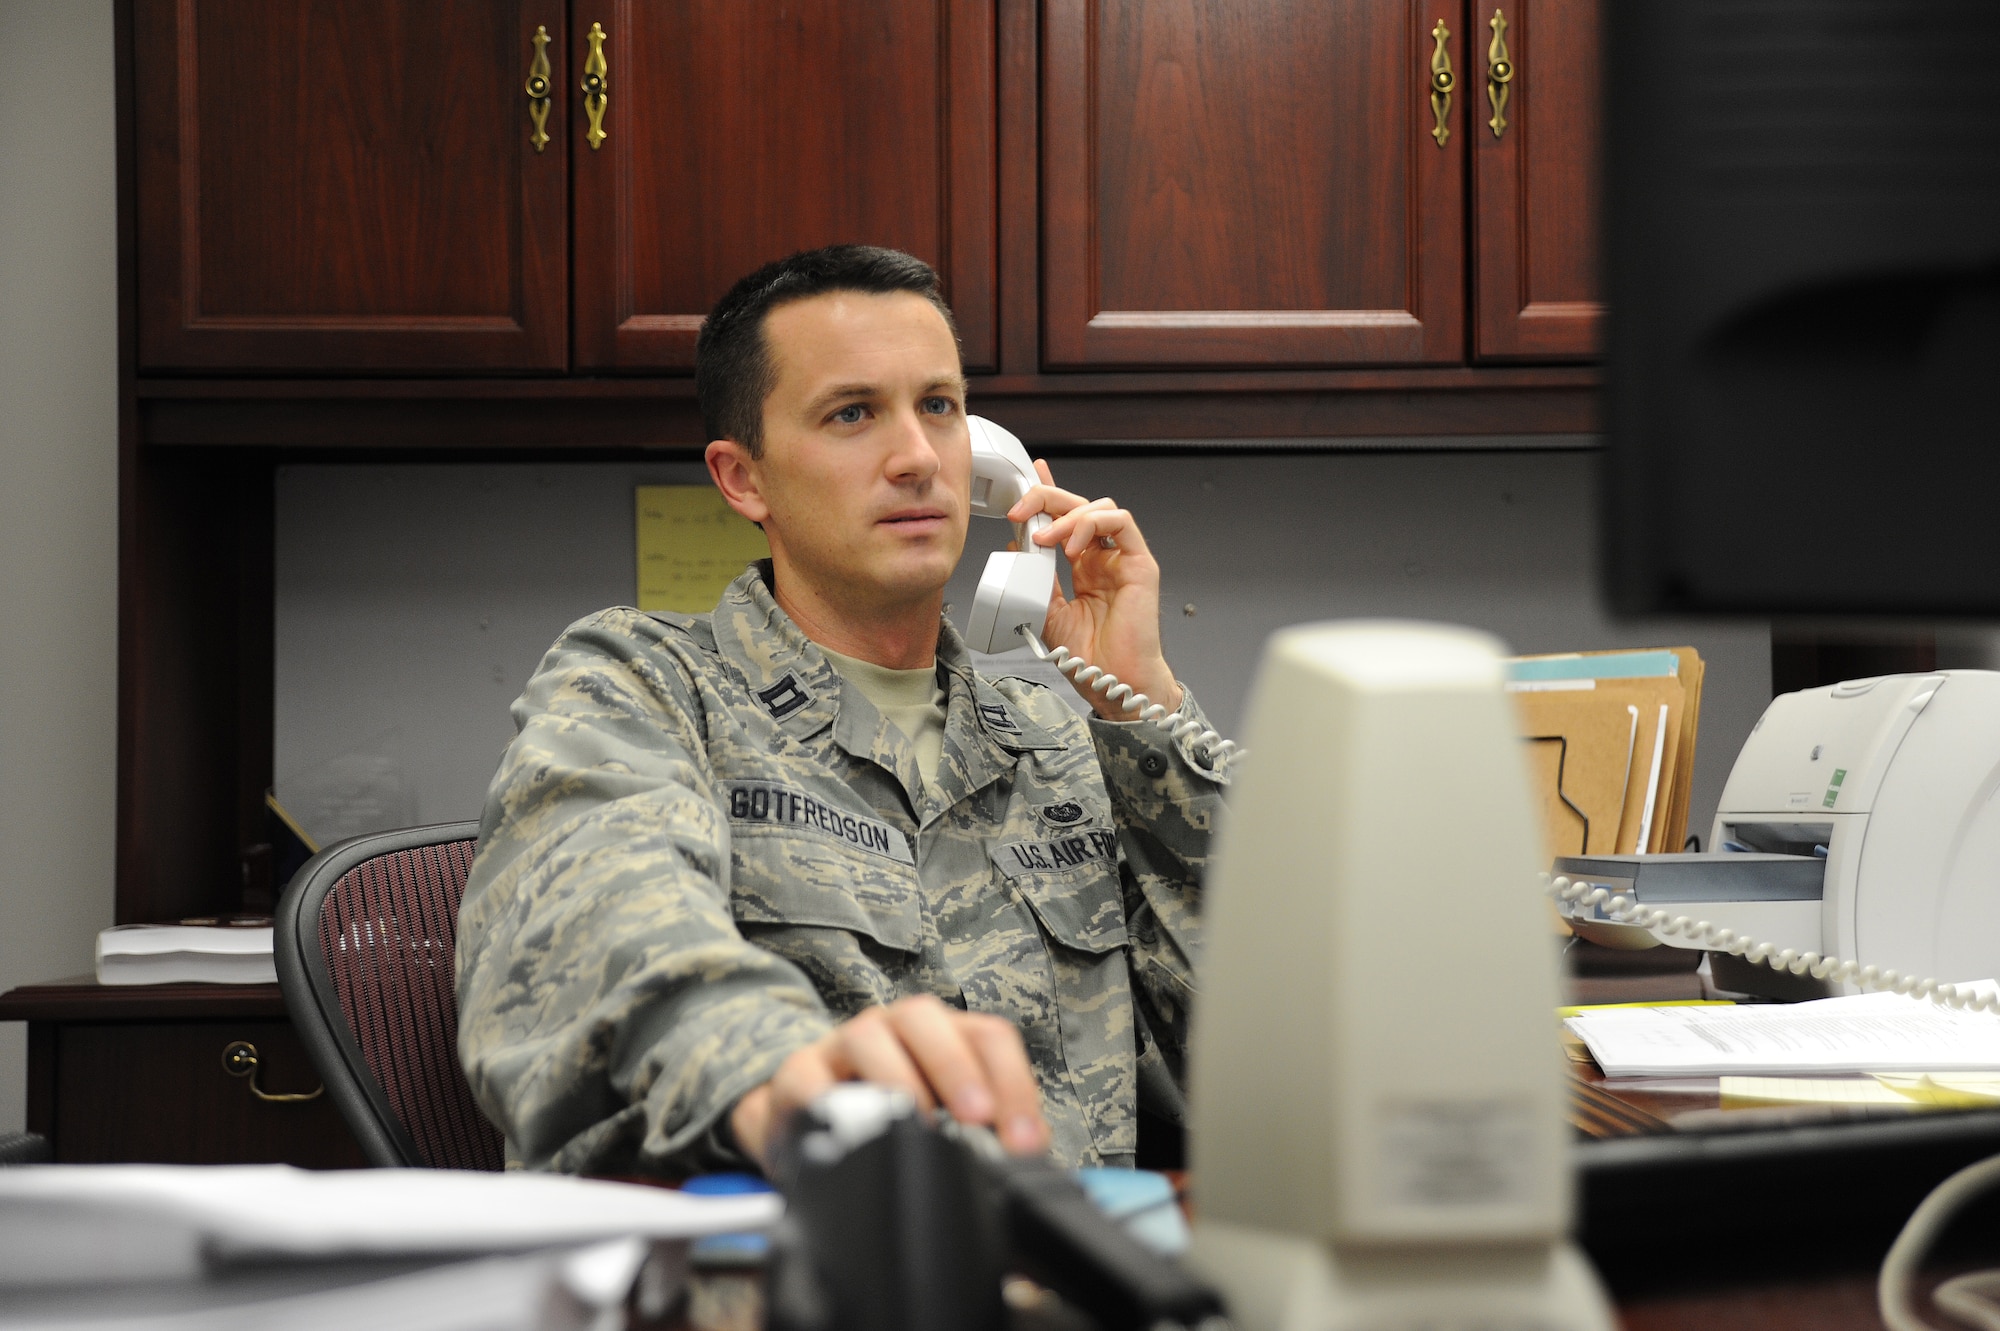 U.S. Air Force Capt. Kevin Gotfredson, 509th Bomb Wing Judge Advocate chief of military justice, advises a first sergeant on a disciplinary issue at Whiteman Air Force Base, Mo., Oct. 30, 2013. The legal office provides a variety of services in order to meet the legal needs of all active-duty, Guard and Reserve military members, civilians, dependents and retirees at Team Whiteman. (U.S. Air Force photo by Staff Sgt. Nick Wilson/Released)